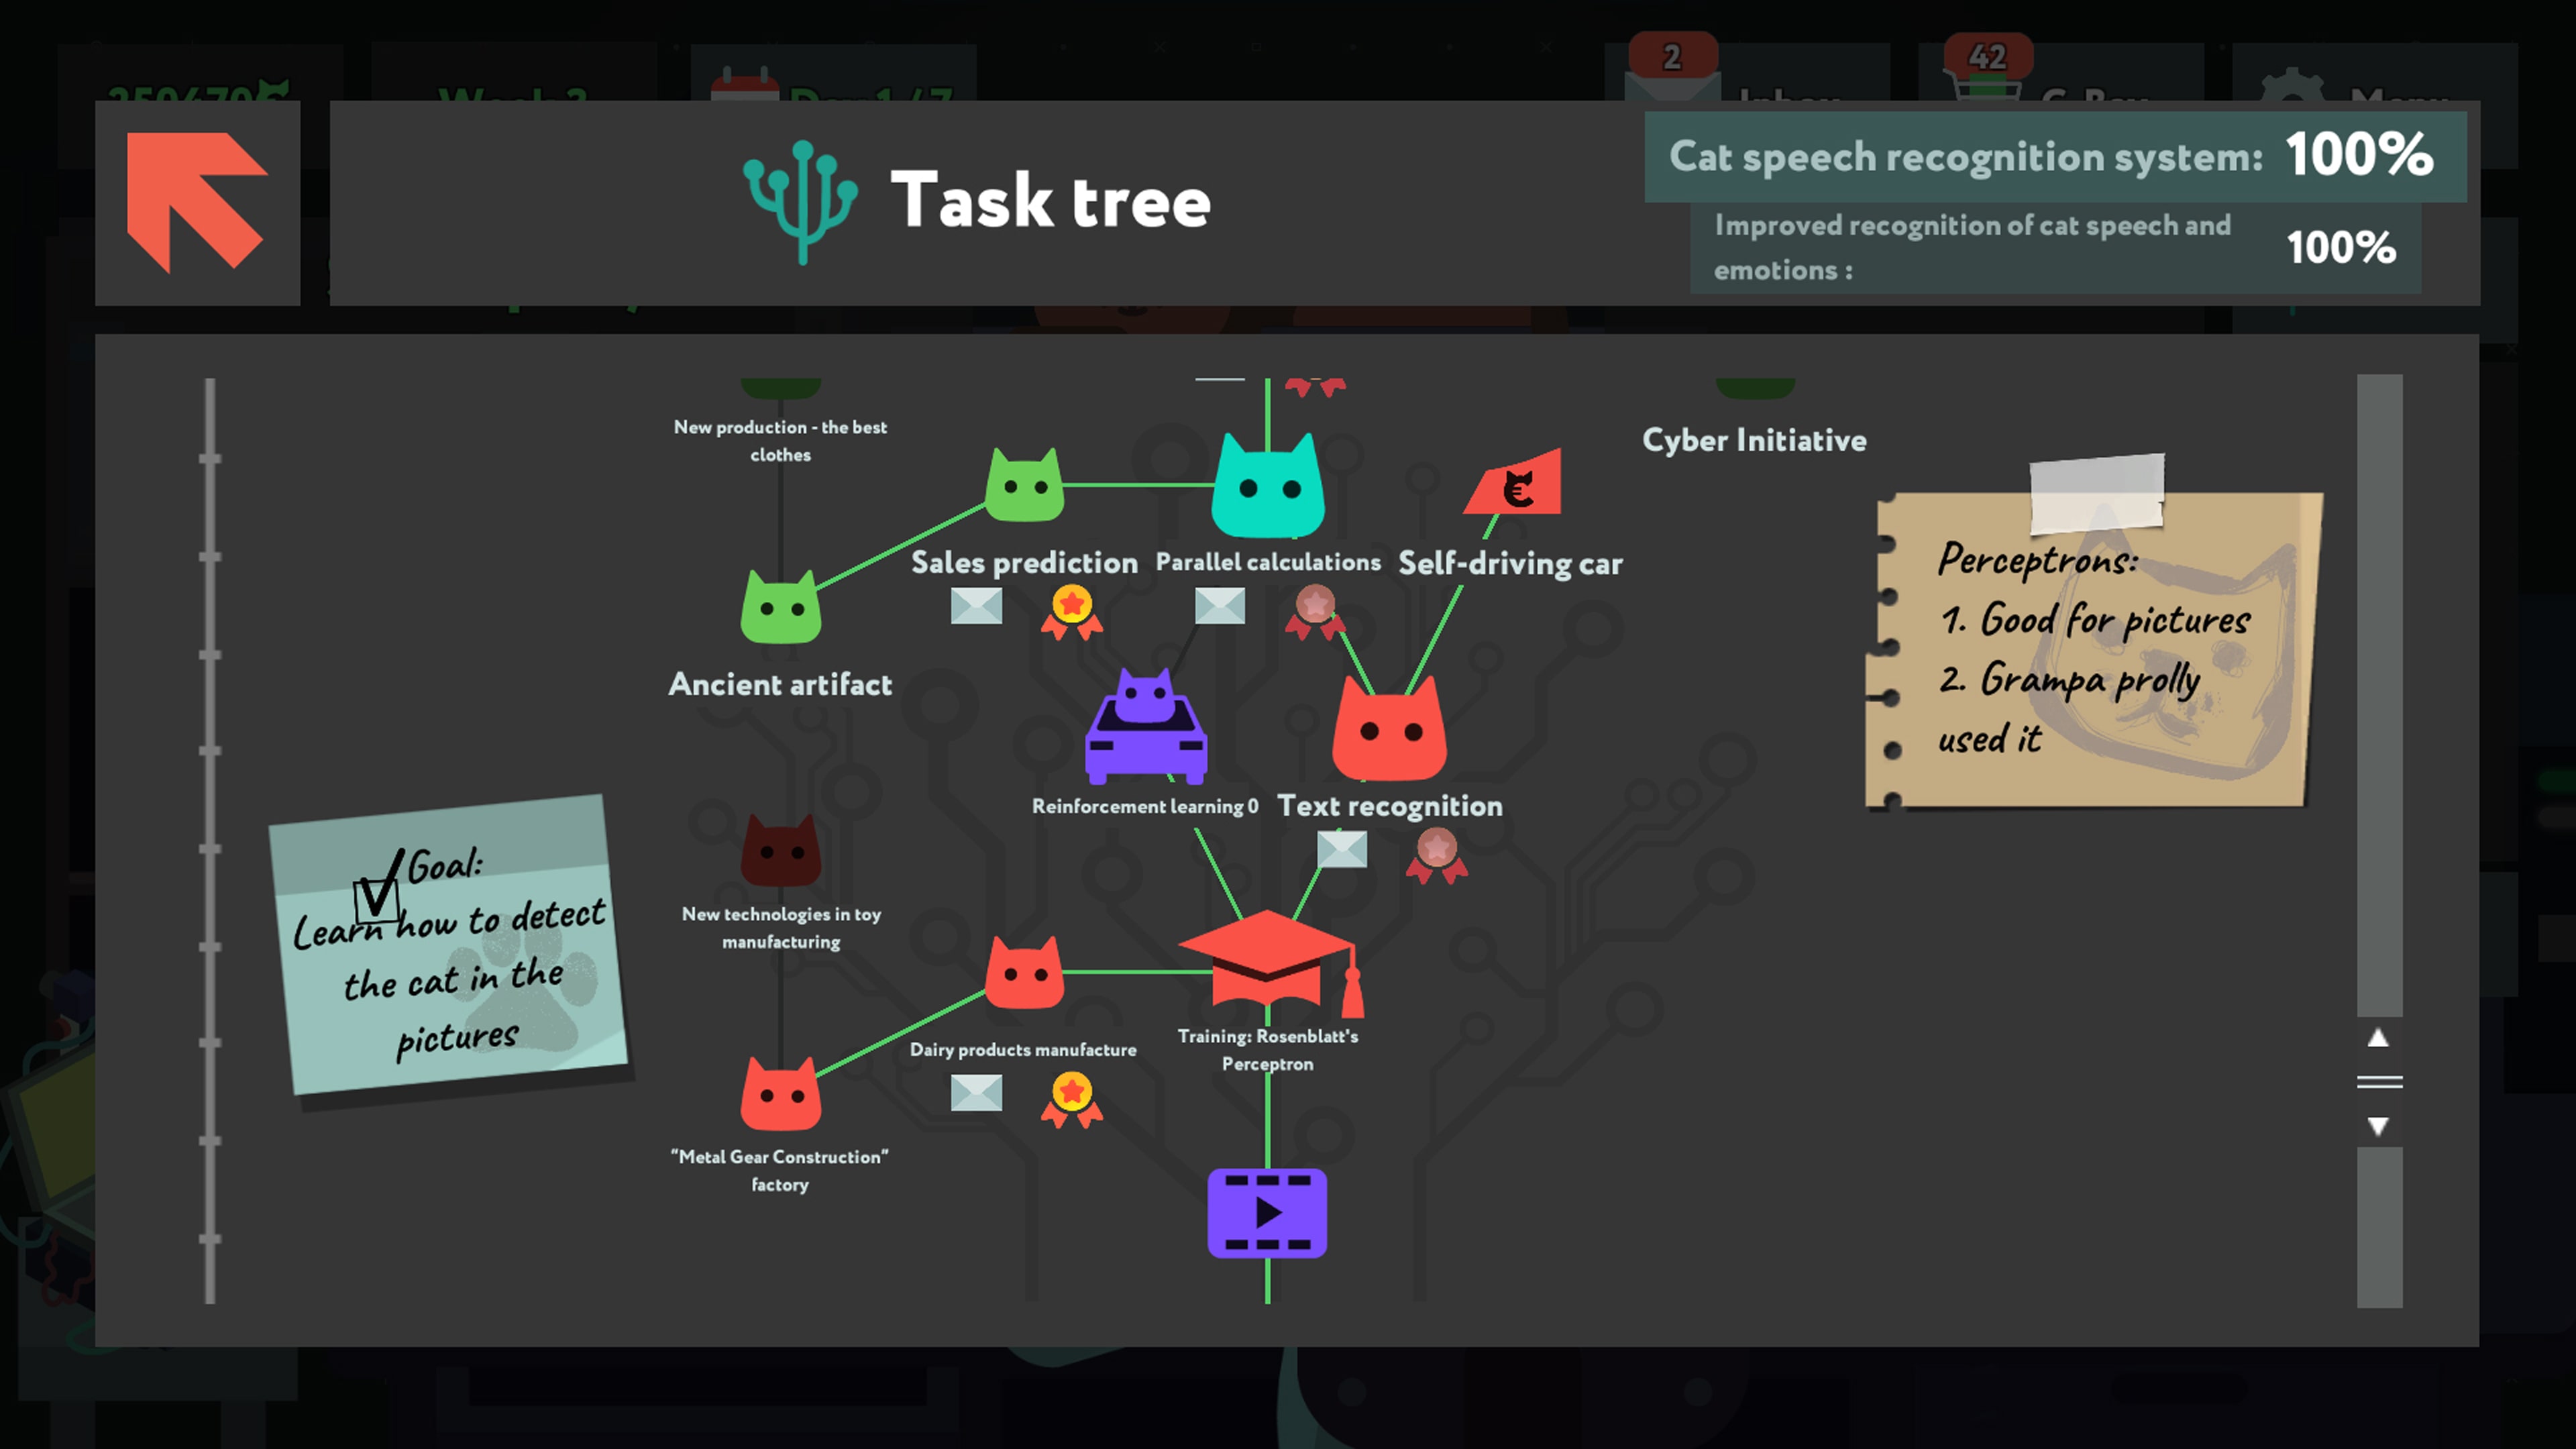 Task tree. While true learn. While true игра. While learn игра. Wild true learn.